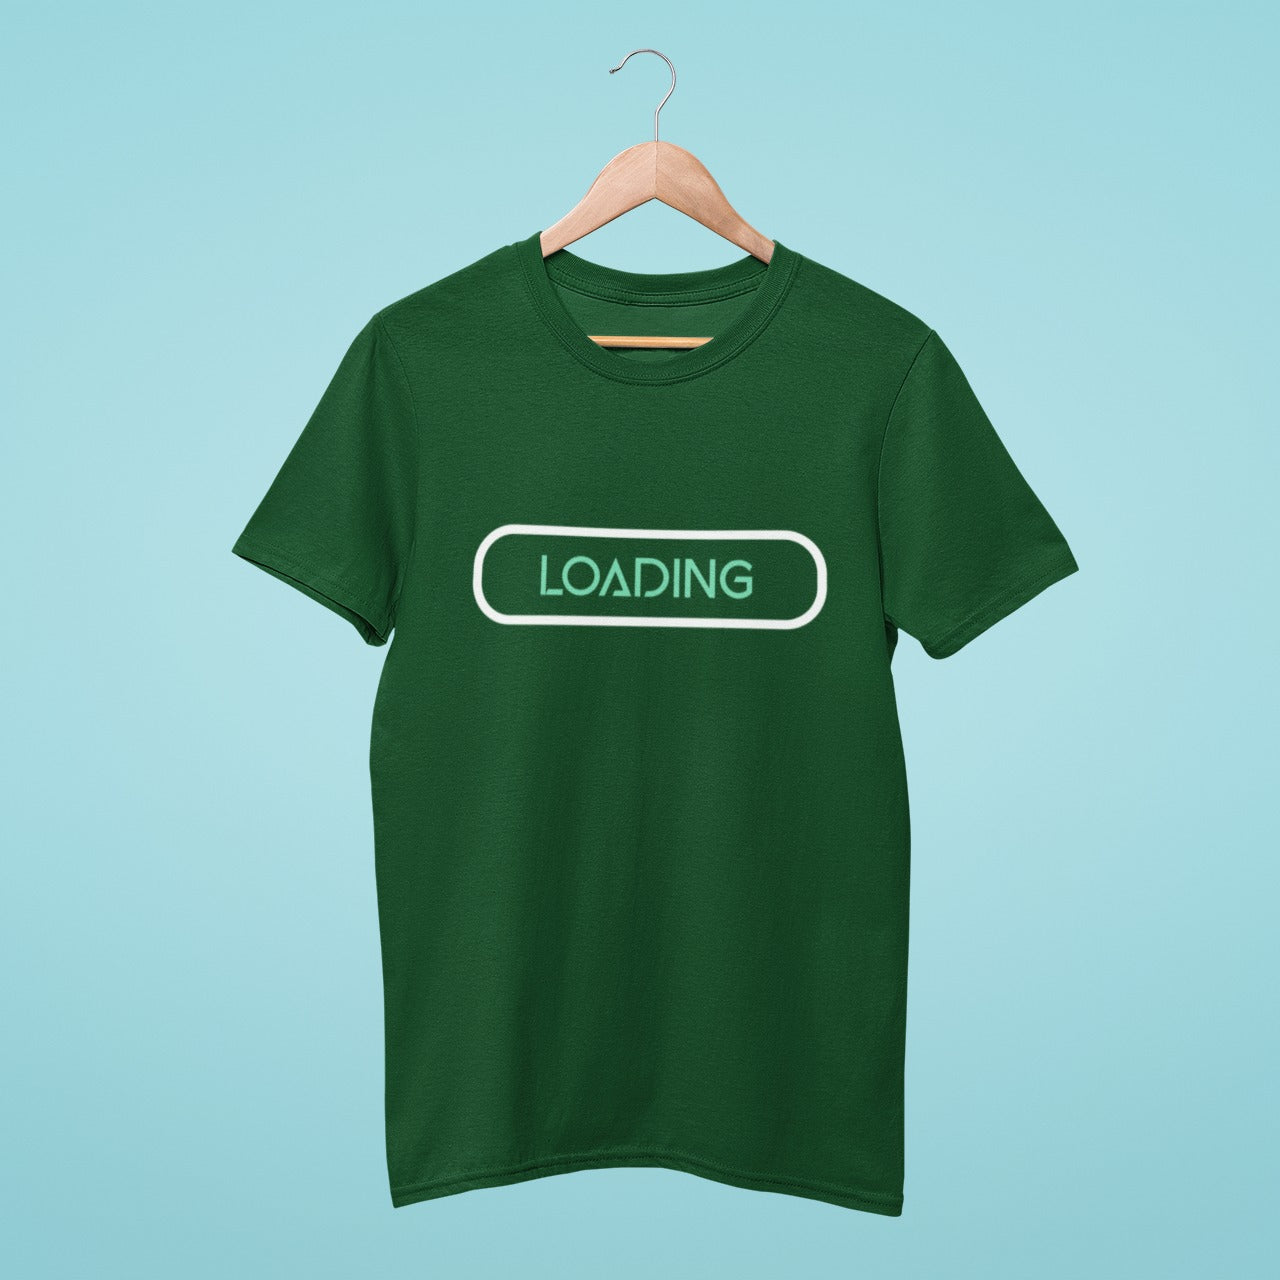 Introducing our trendy green t-shirt with "Loading" written in a cool game-style button. Get ready to level up your style game with this comfy and fashionable t-shirt. Whether you're a gamer or not, this shirt is perfect for any casual occasion. The vibrant green color and unique design will make you stand out from the crowd. Upgrade your wardrobe with this must-have t-shirt today!